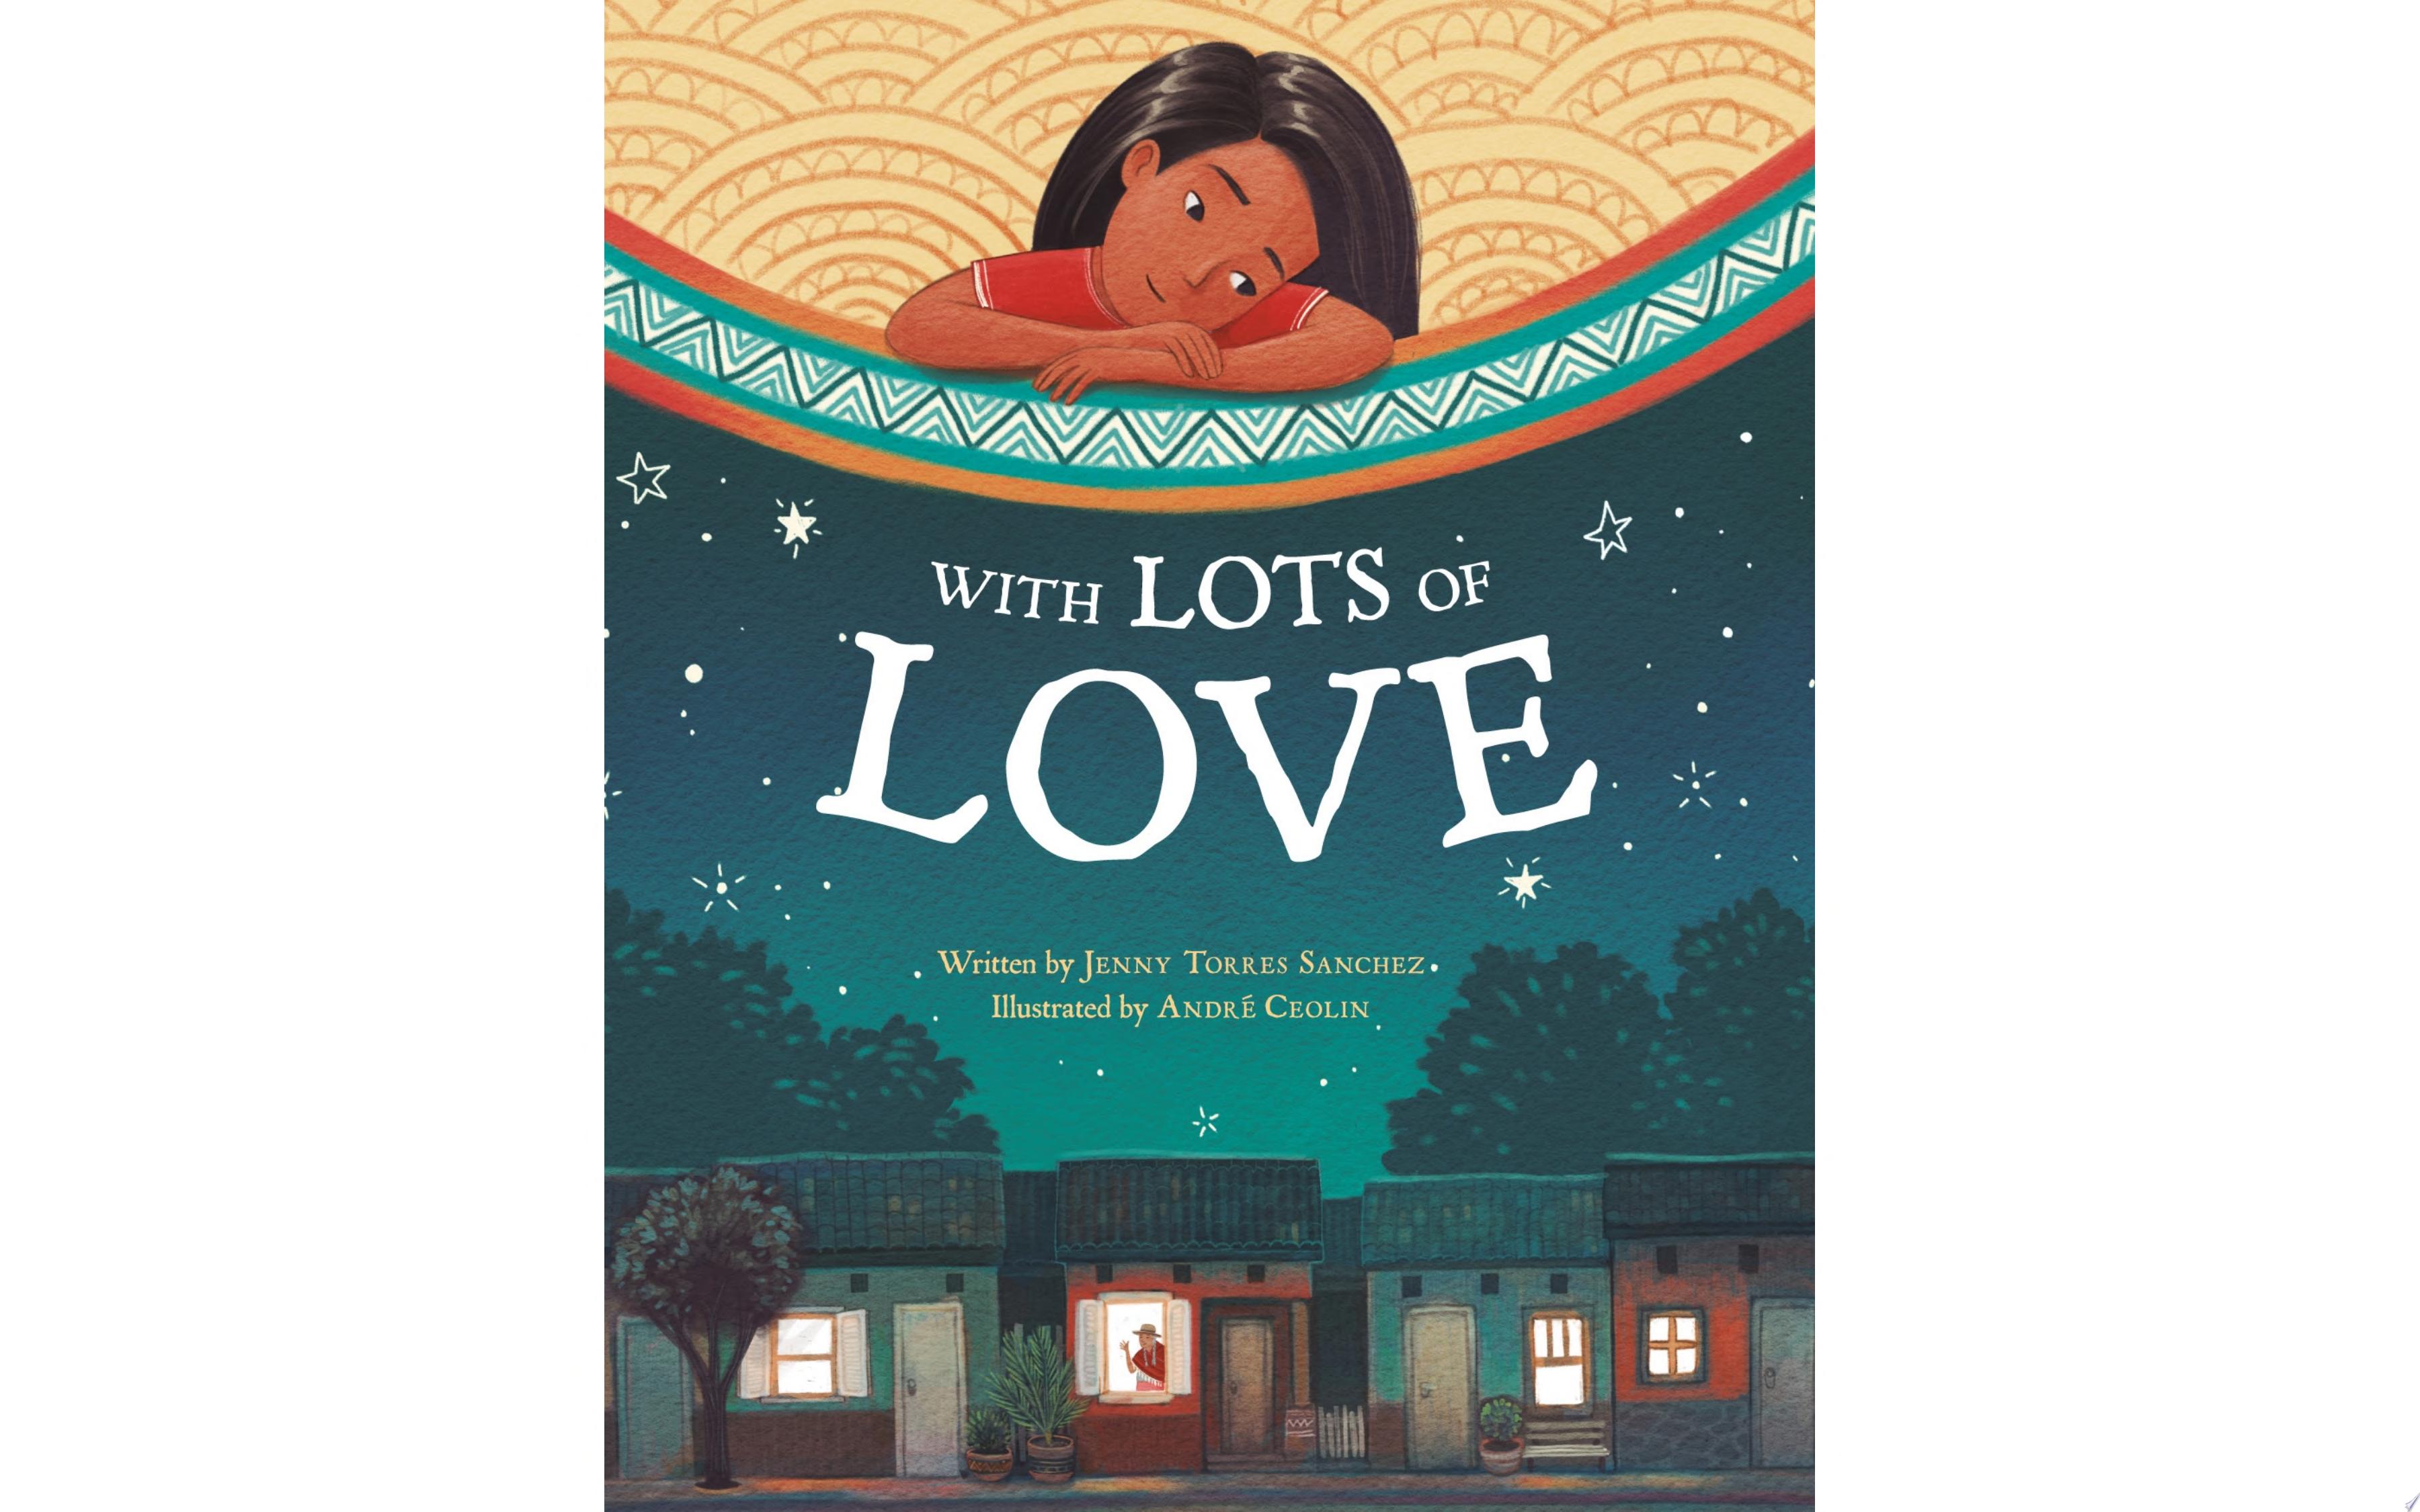 Image for "With Lots of Love"